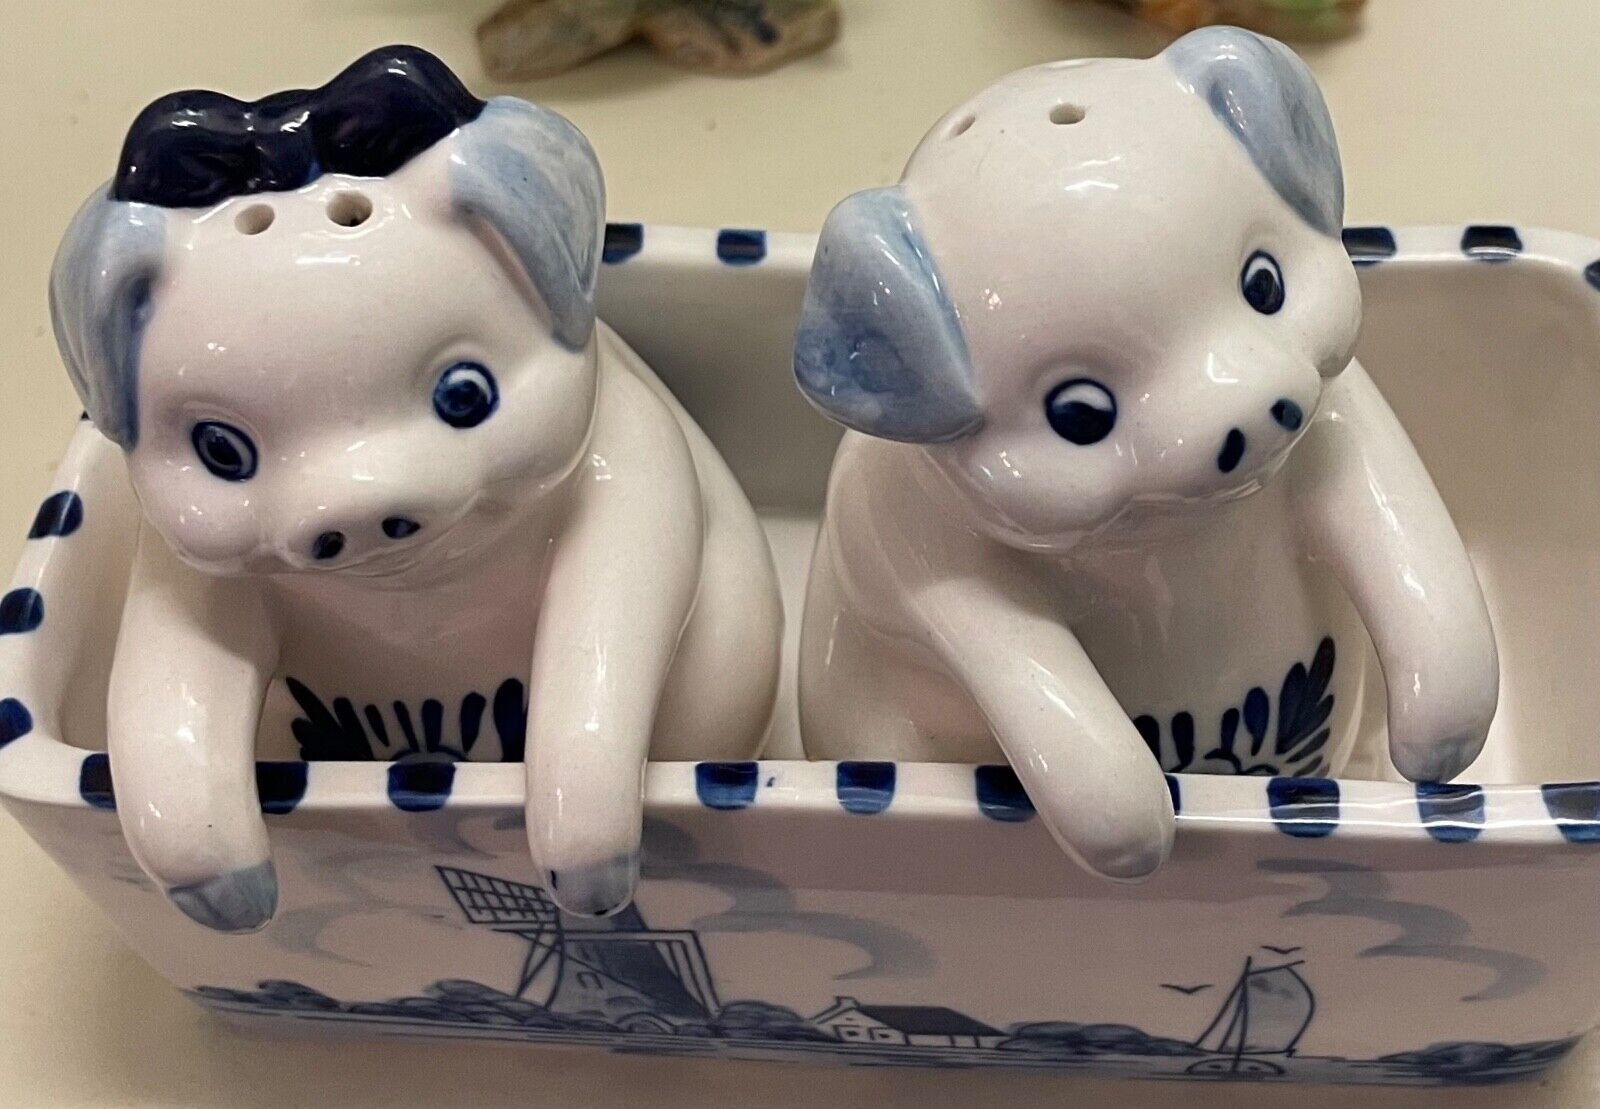 Vintage Delft Blue Hand painted Pigs in a Trough Salt and Pepper Shakers